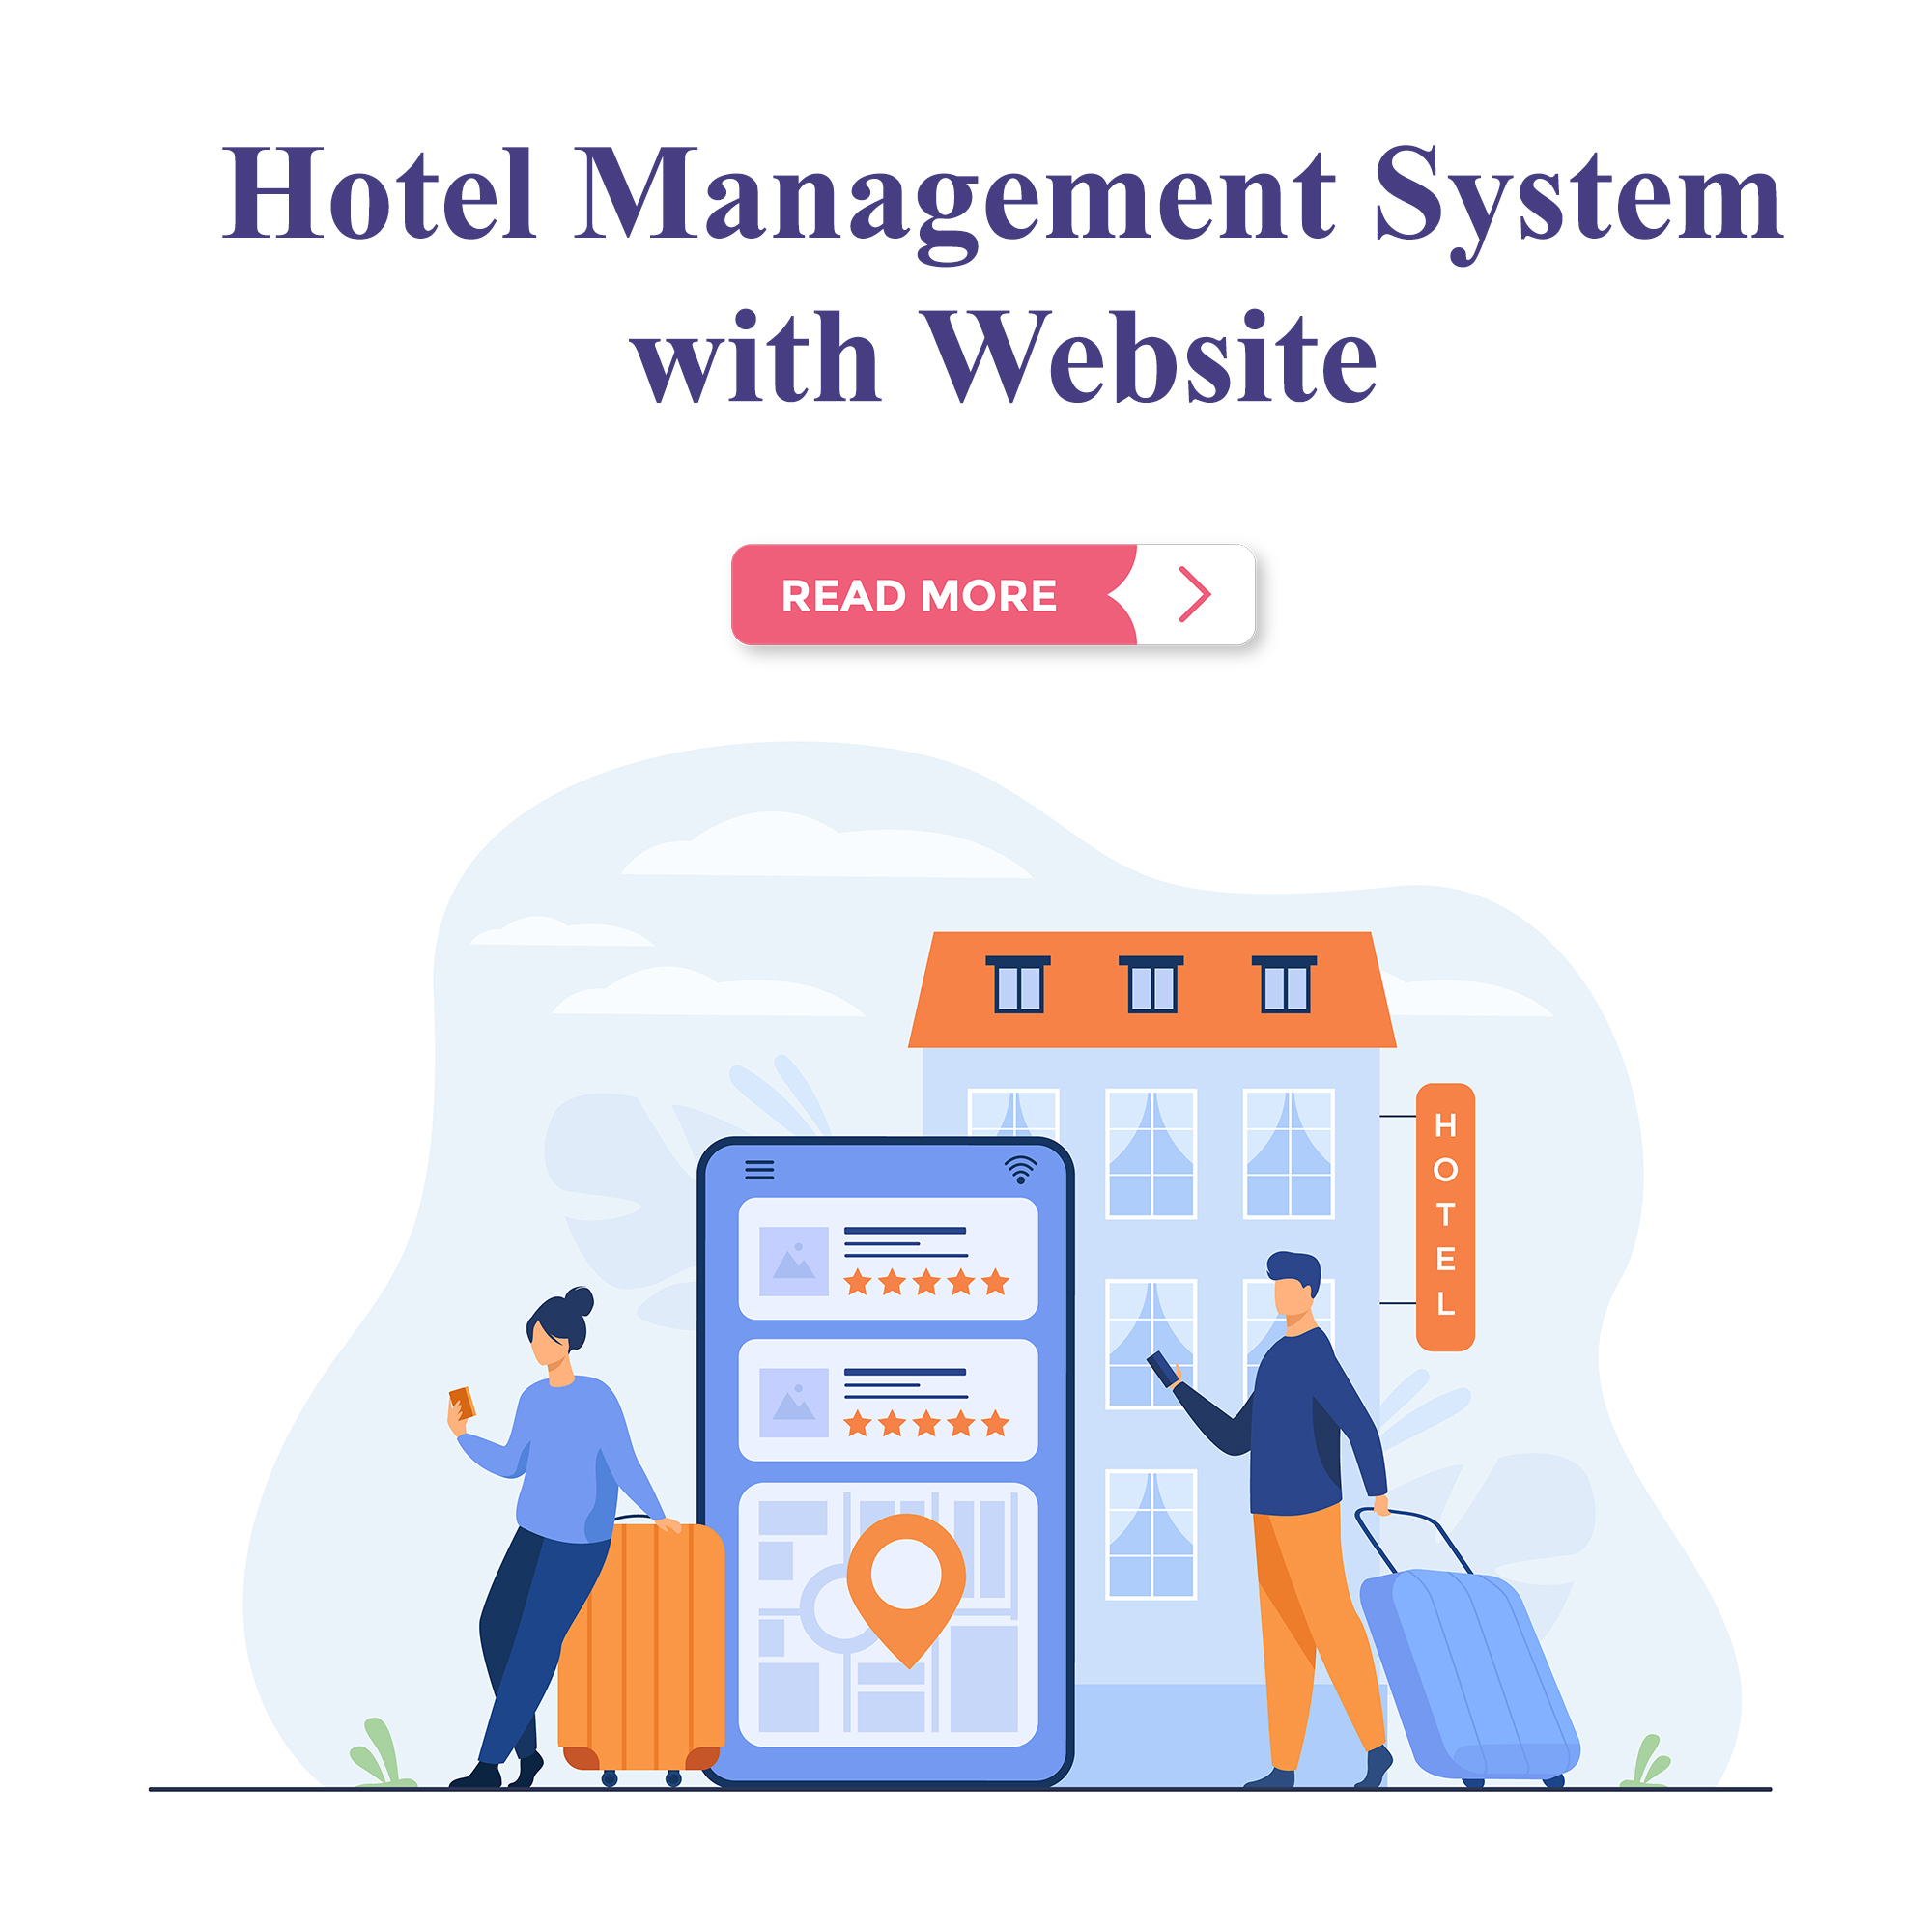 Hotel Management System with Website